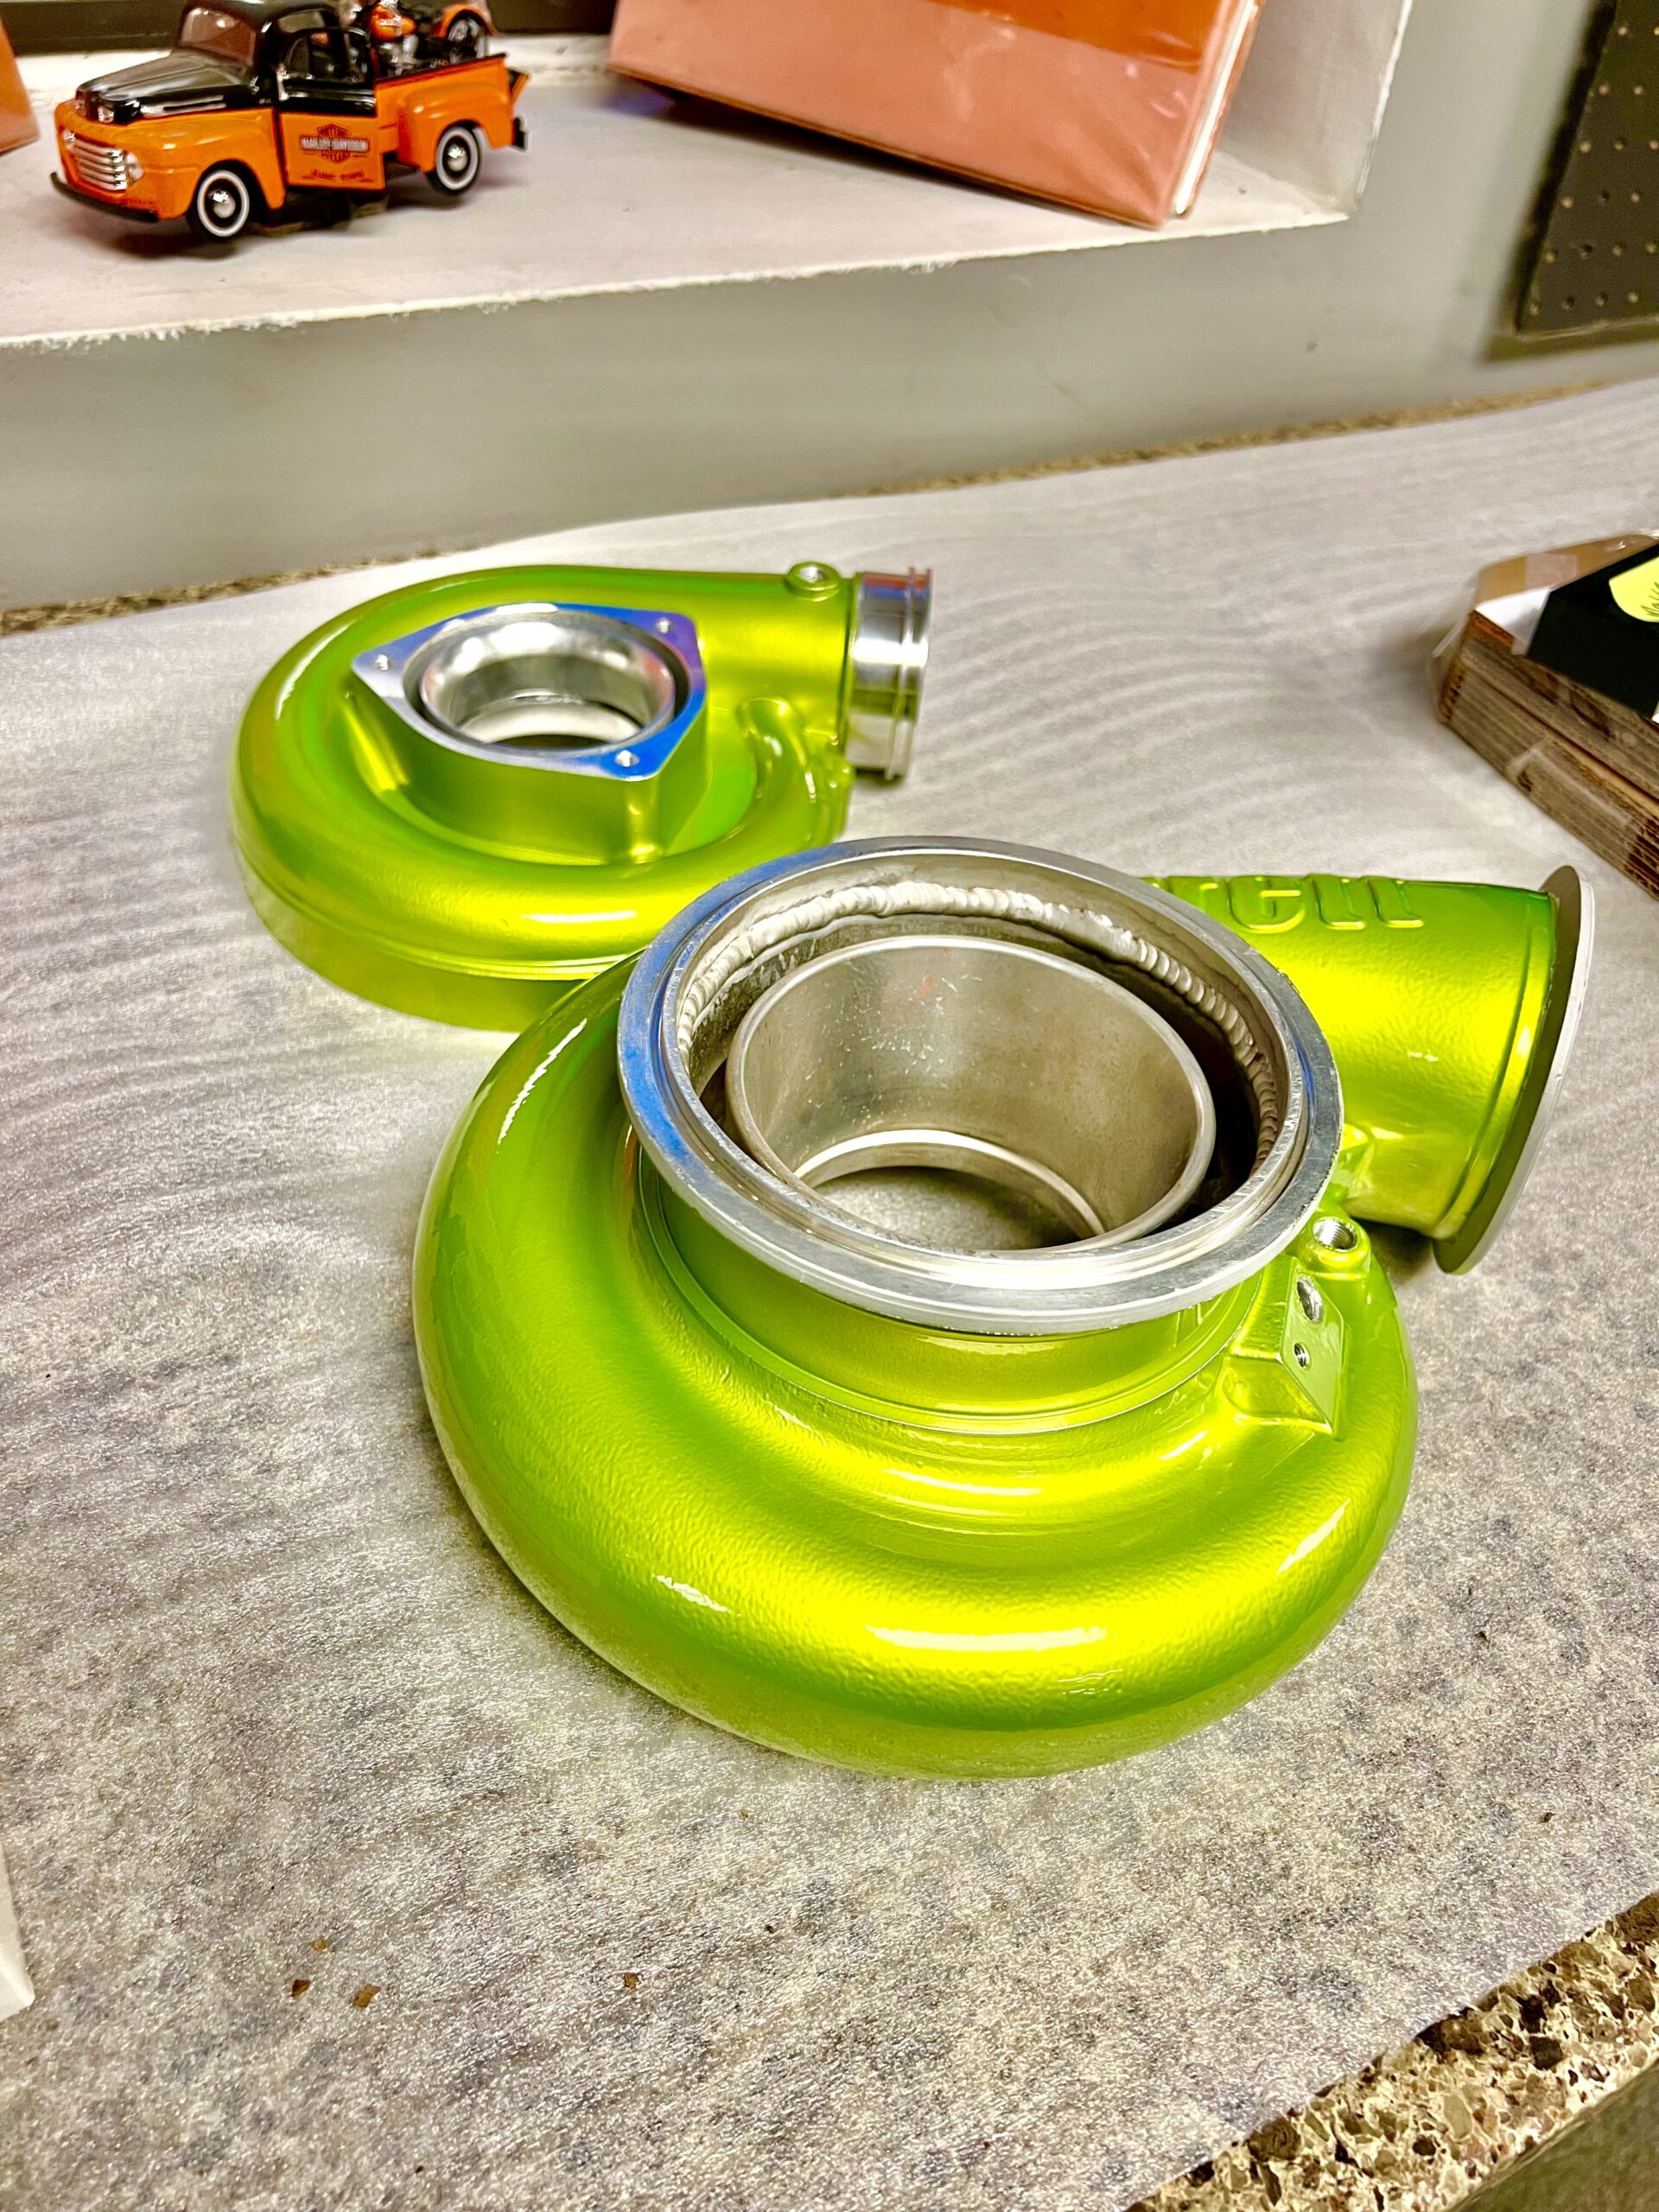 Turbos powder coated with polished aluminum base coat and prismatic shower yellow candy top coat